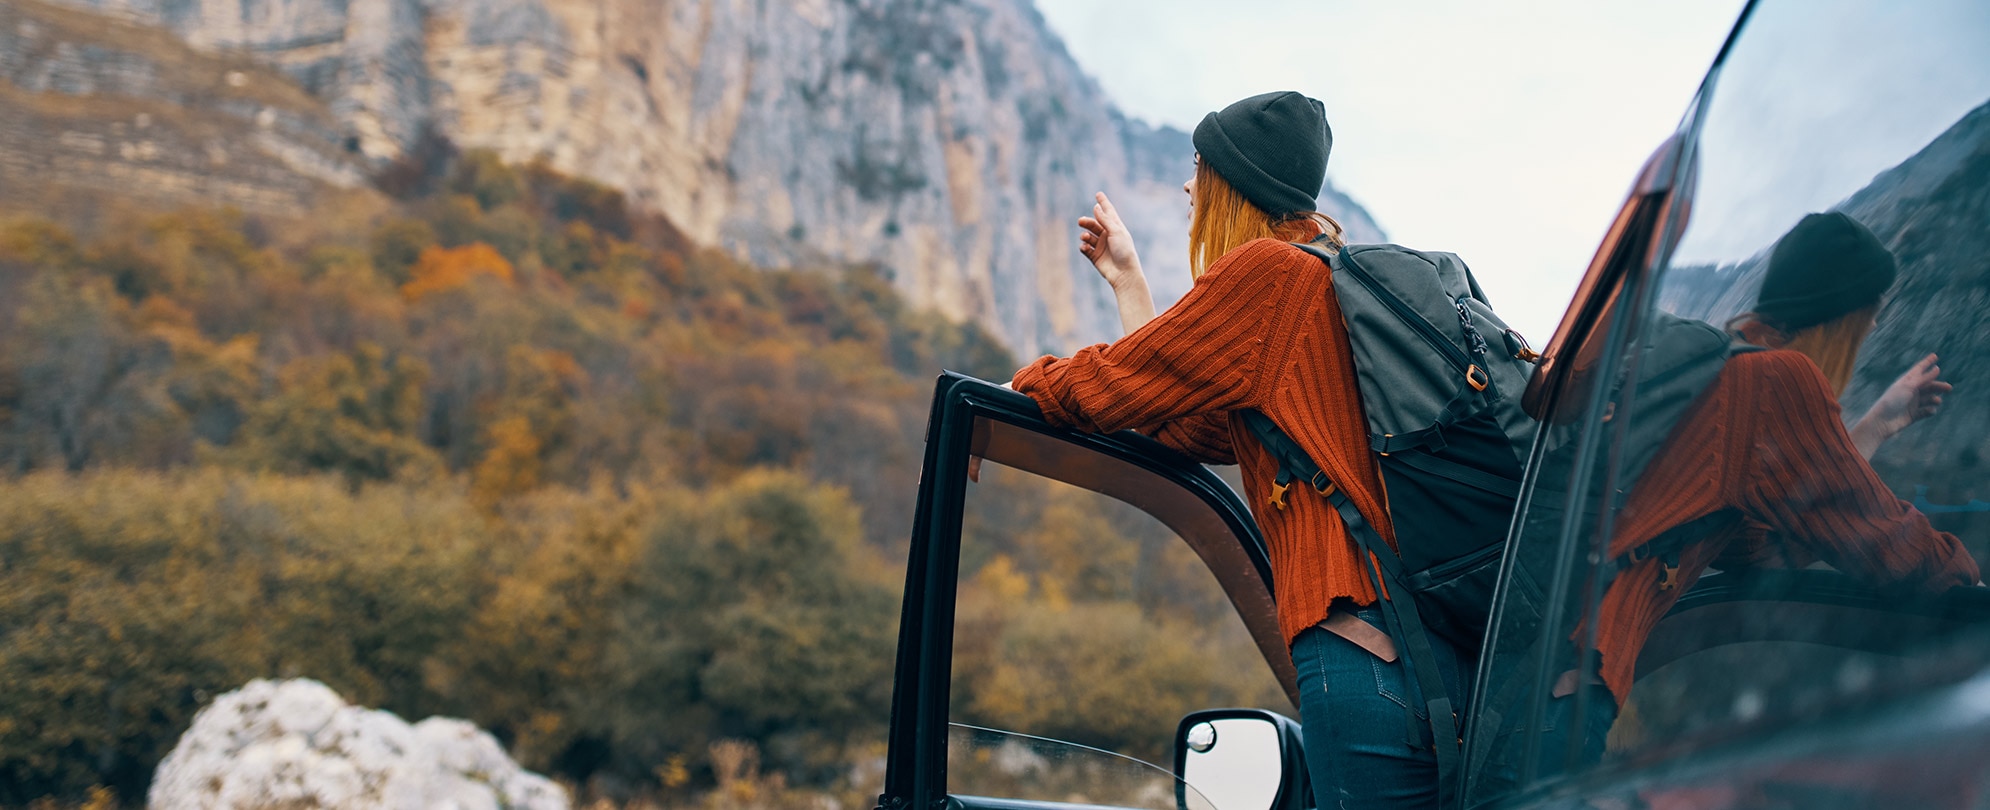 A woman leaning out of her car, pointing at a nearby mountain with trees cascading down.